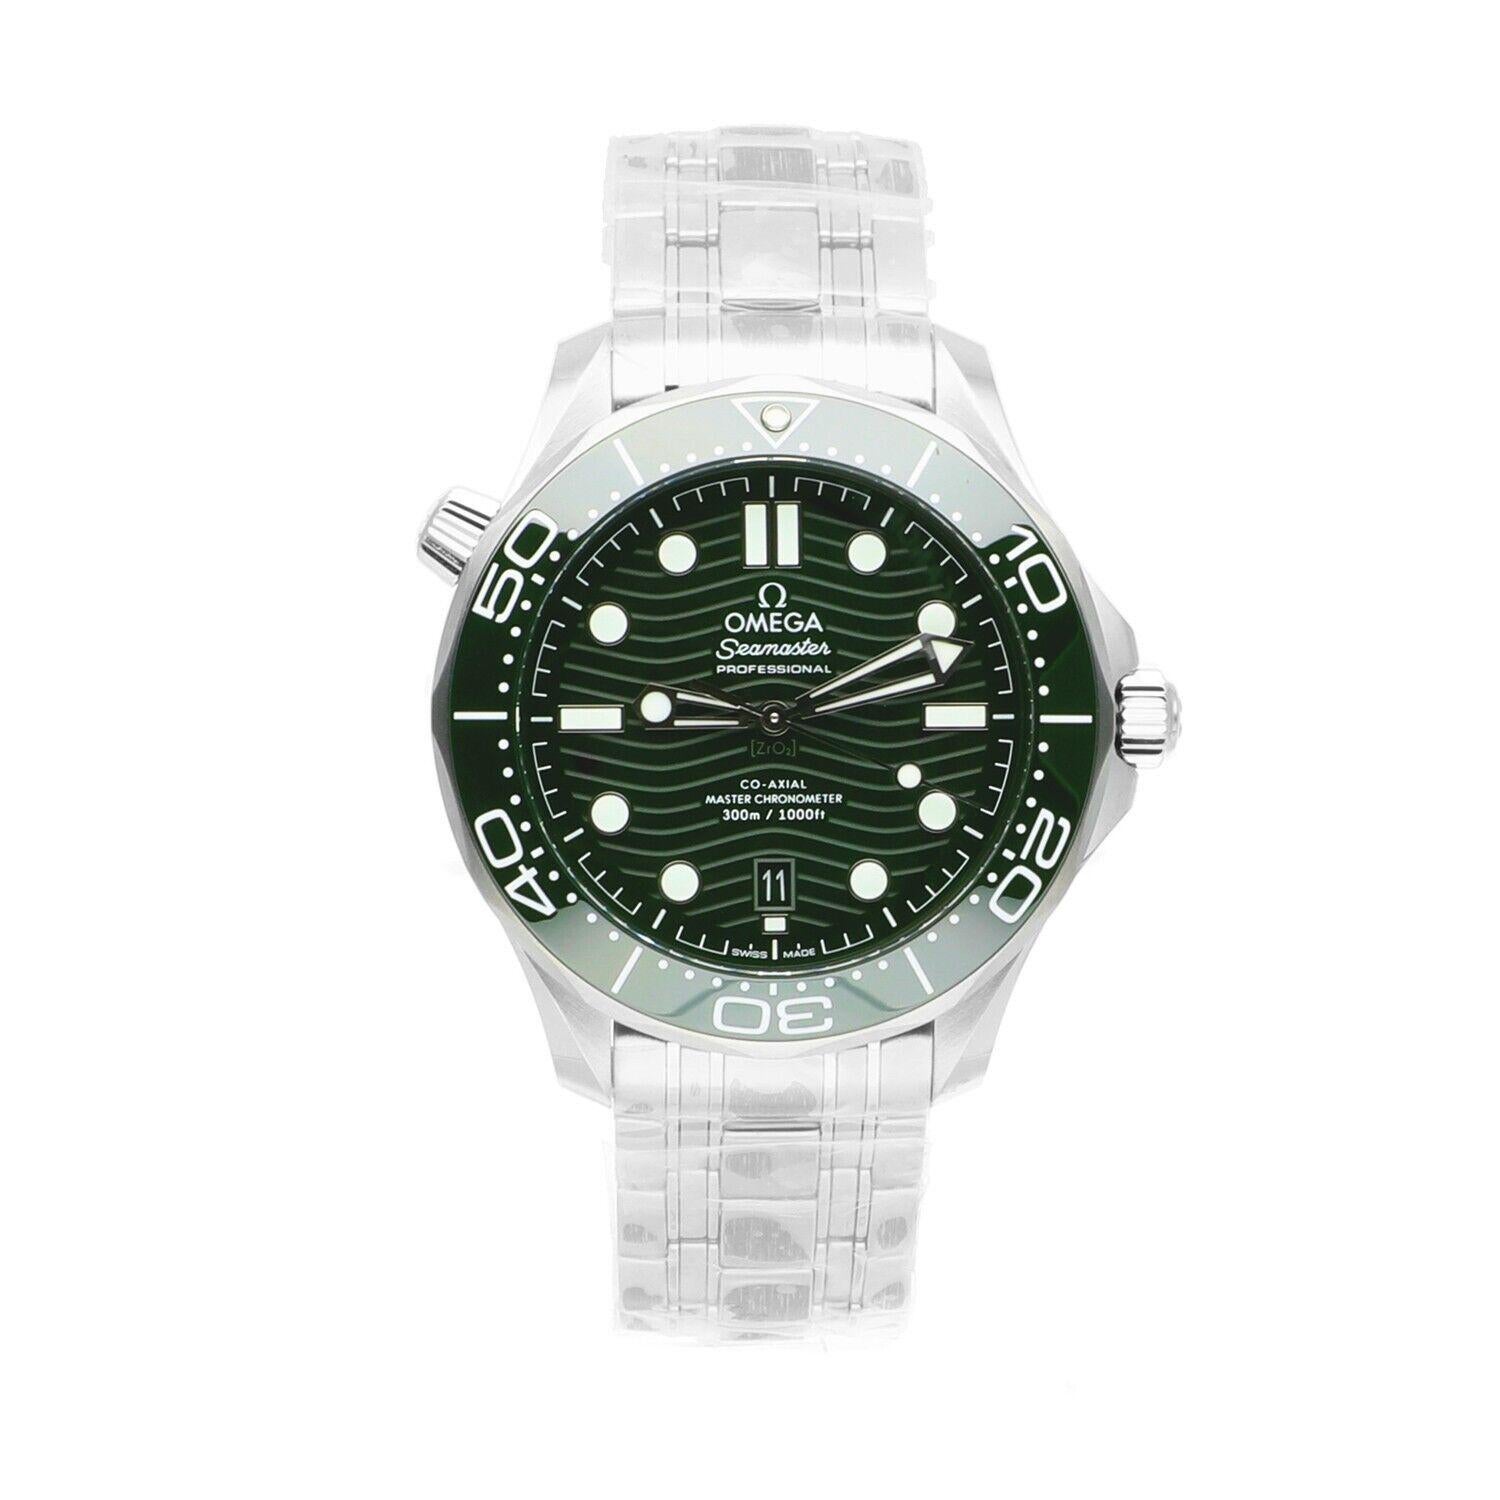 This 42 mm model is crafted from stainless steel and includes a green ceramic bezel with a white enamel diving scale. The dial is also polished green ceramic and features laser-engraved waves and a date window at 6 o’clock.
The skeleton hands and